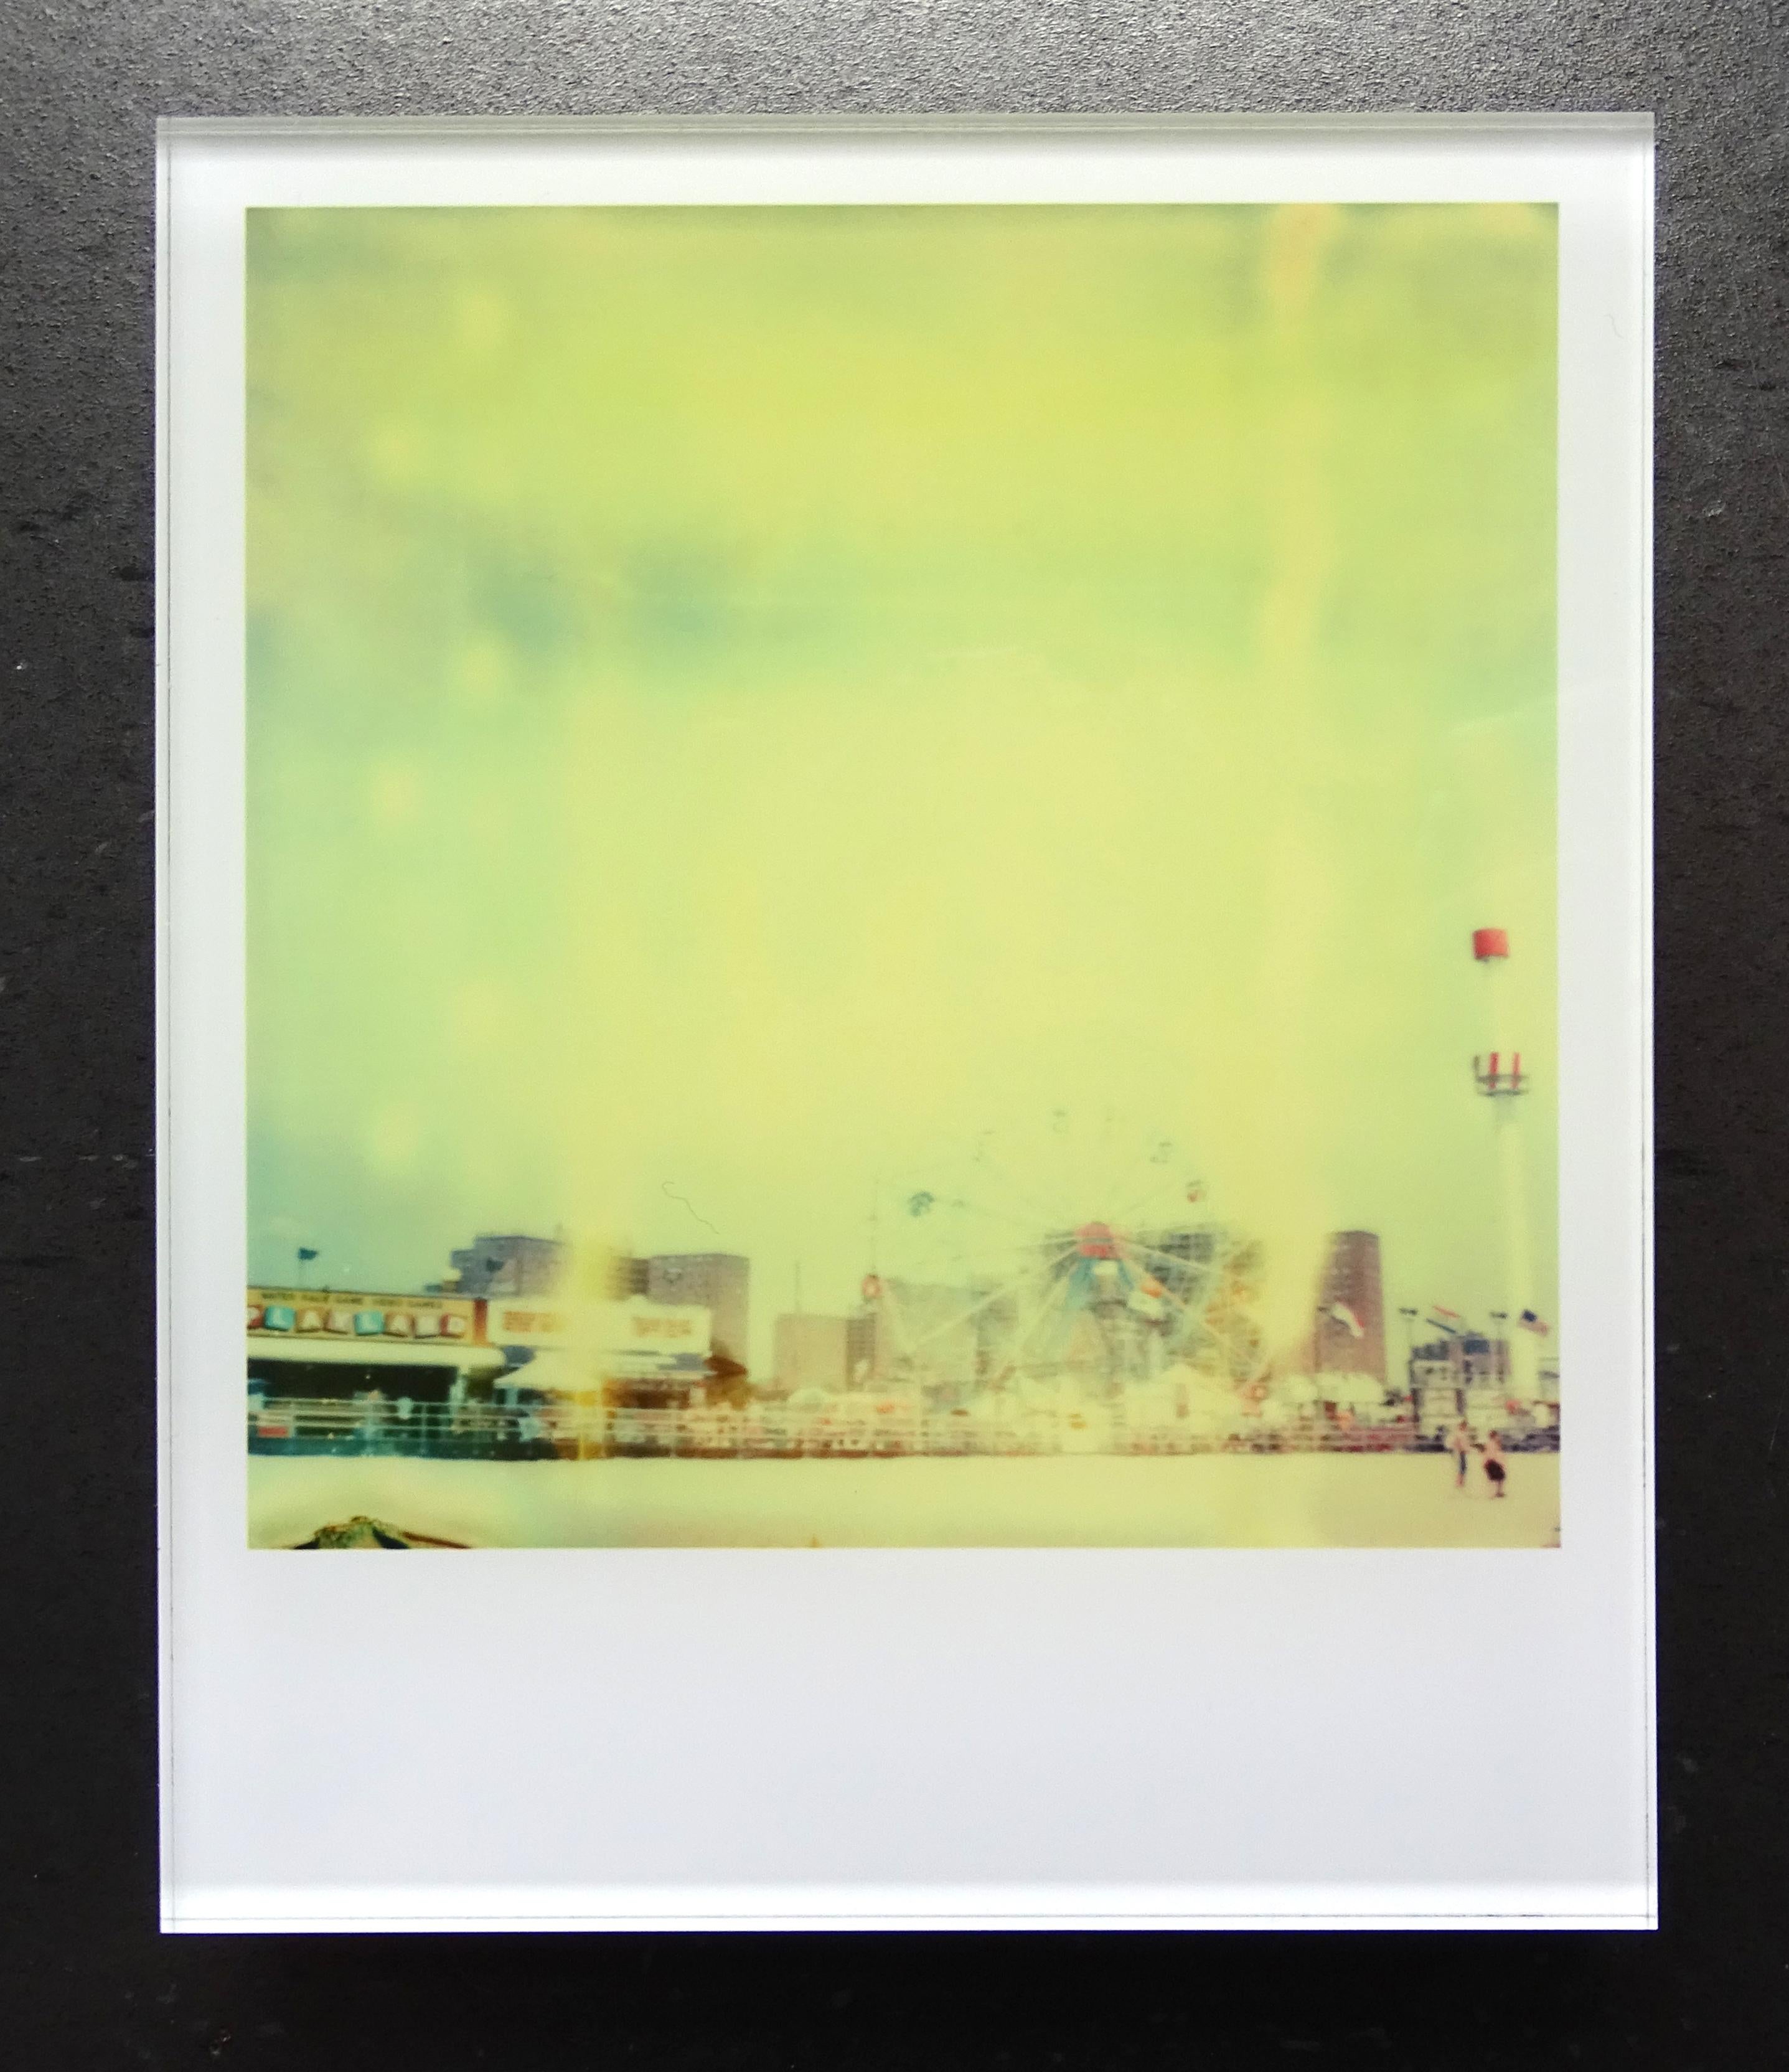 Stefanie Schneider's Minis
Coney Island (Stay), 2006

Signed and signature brand on verso.
Lambda digital Color Photographs based on a Polaroid.
Sandwiched in between Plexiglass (thickness 0.7cm)

from the movie 'Stay' by Marc Forster, featuring